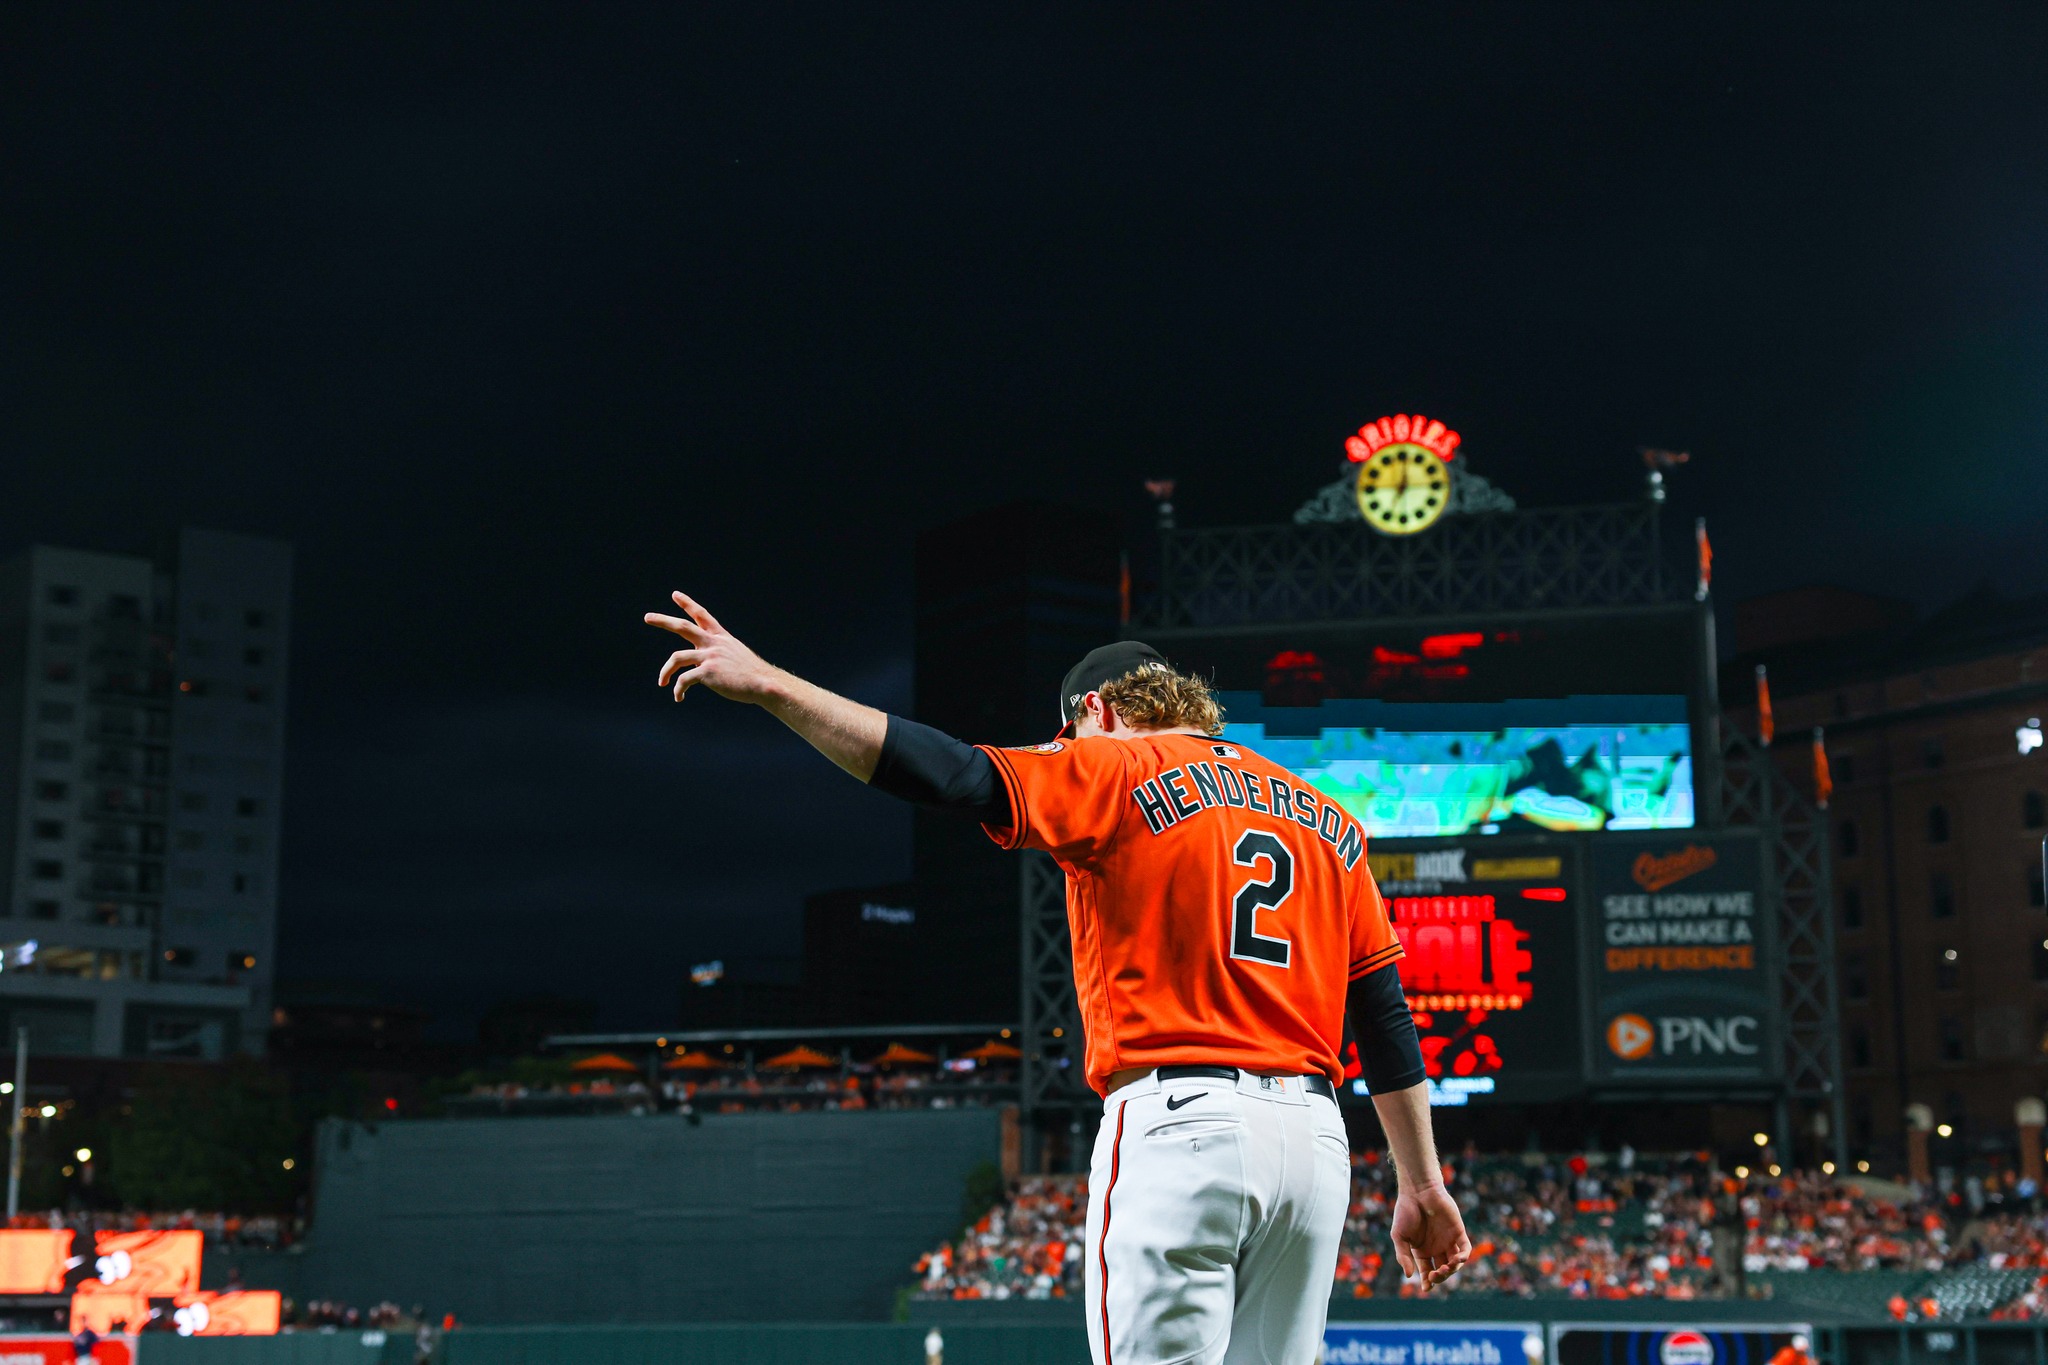 Your Postseason Guide to the Baltimore Orioles 